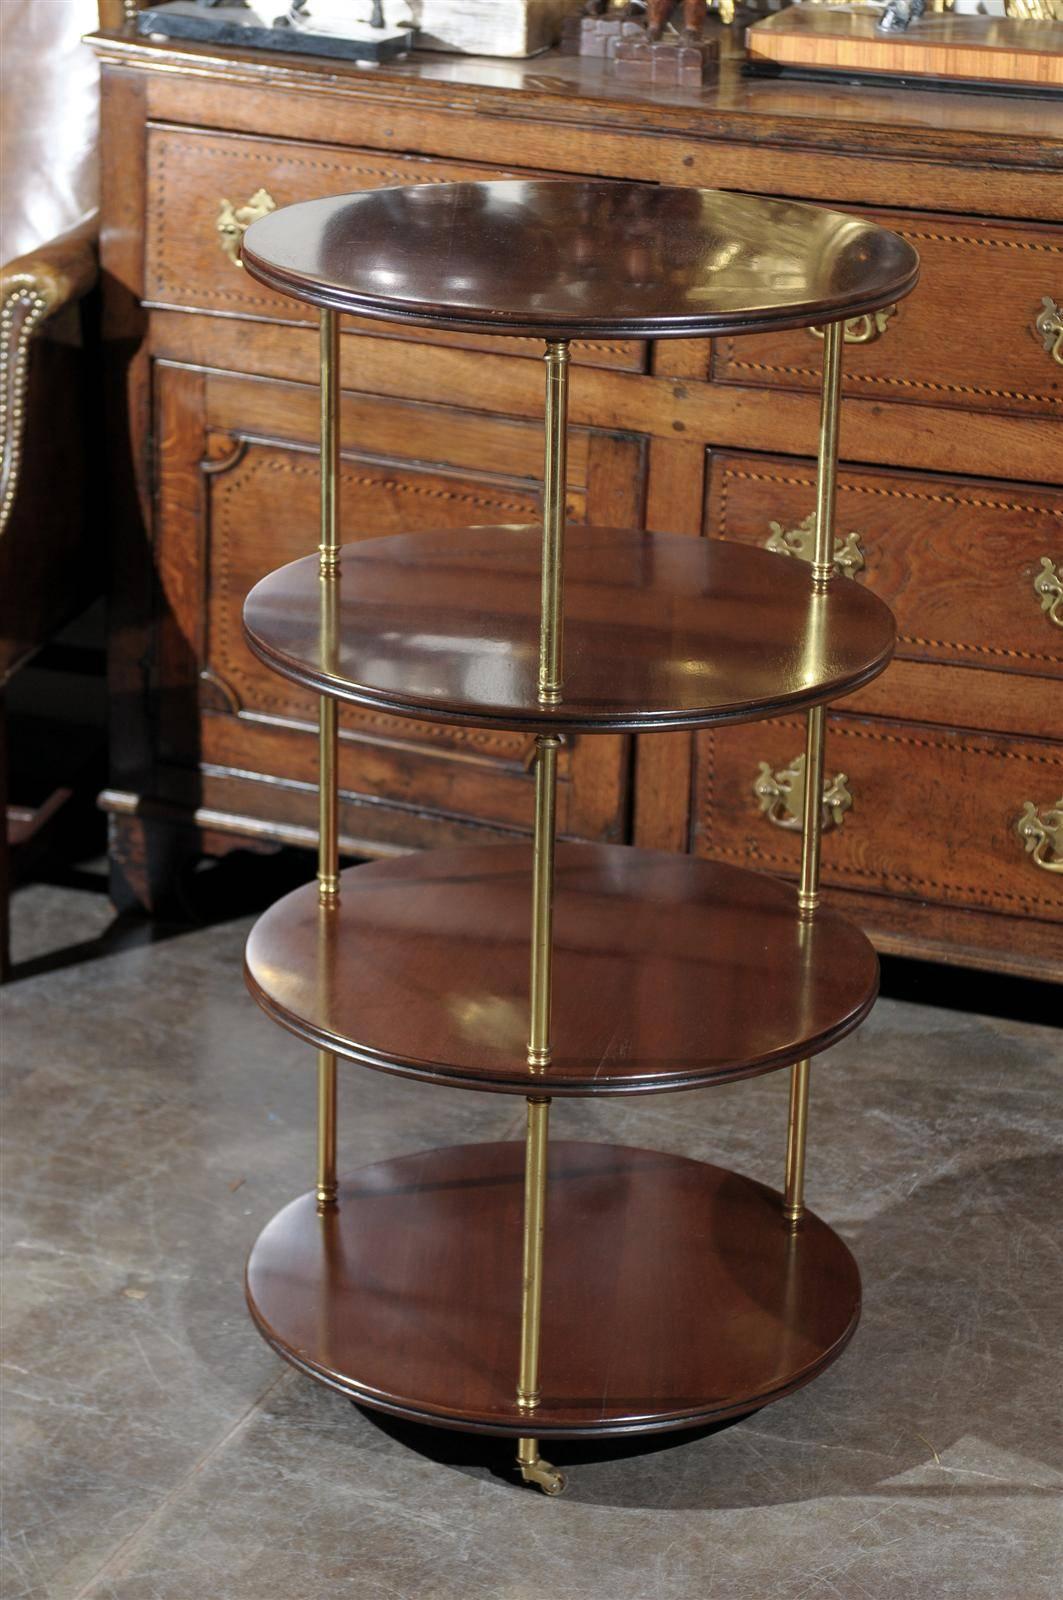 A four tier, round English mahogany and brass trolley from mid century.  This elegant English four-tier trolley features four round mahogany shelves gathered by three brass shafts resting on casters.  This trolley is a perfect example of furniture